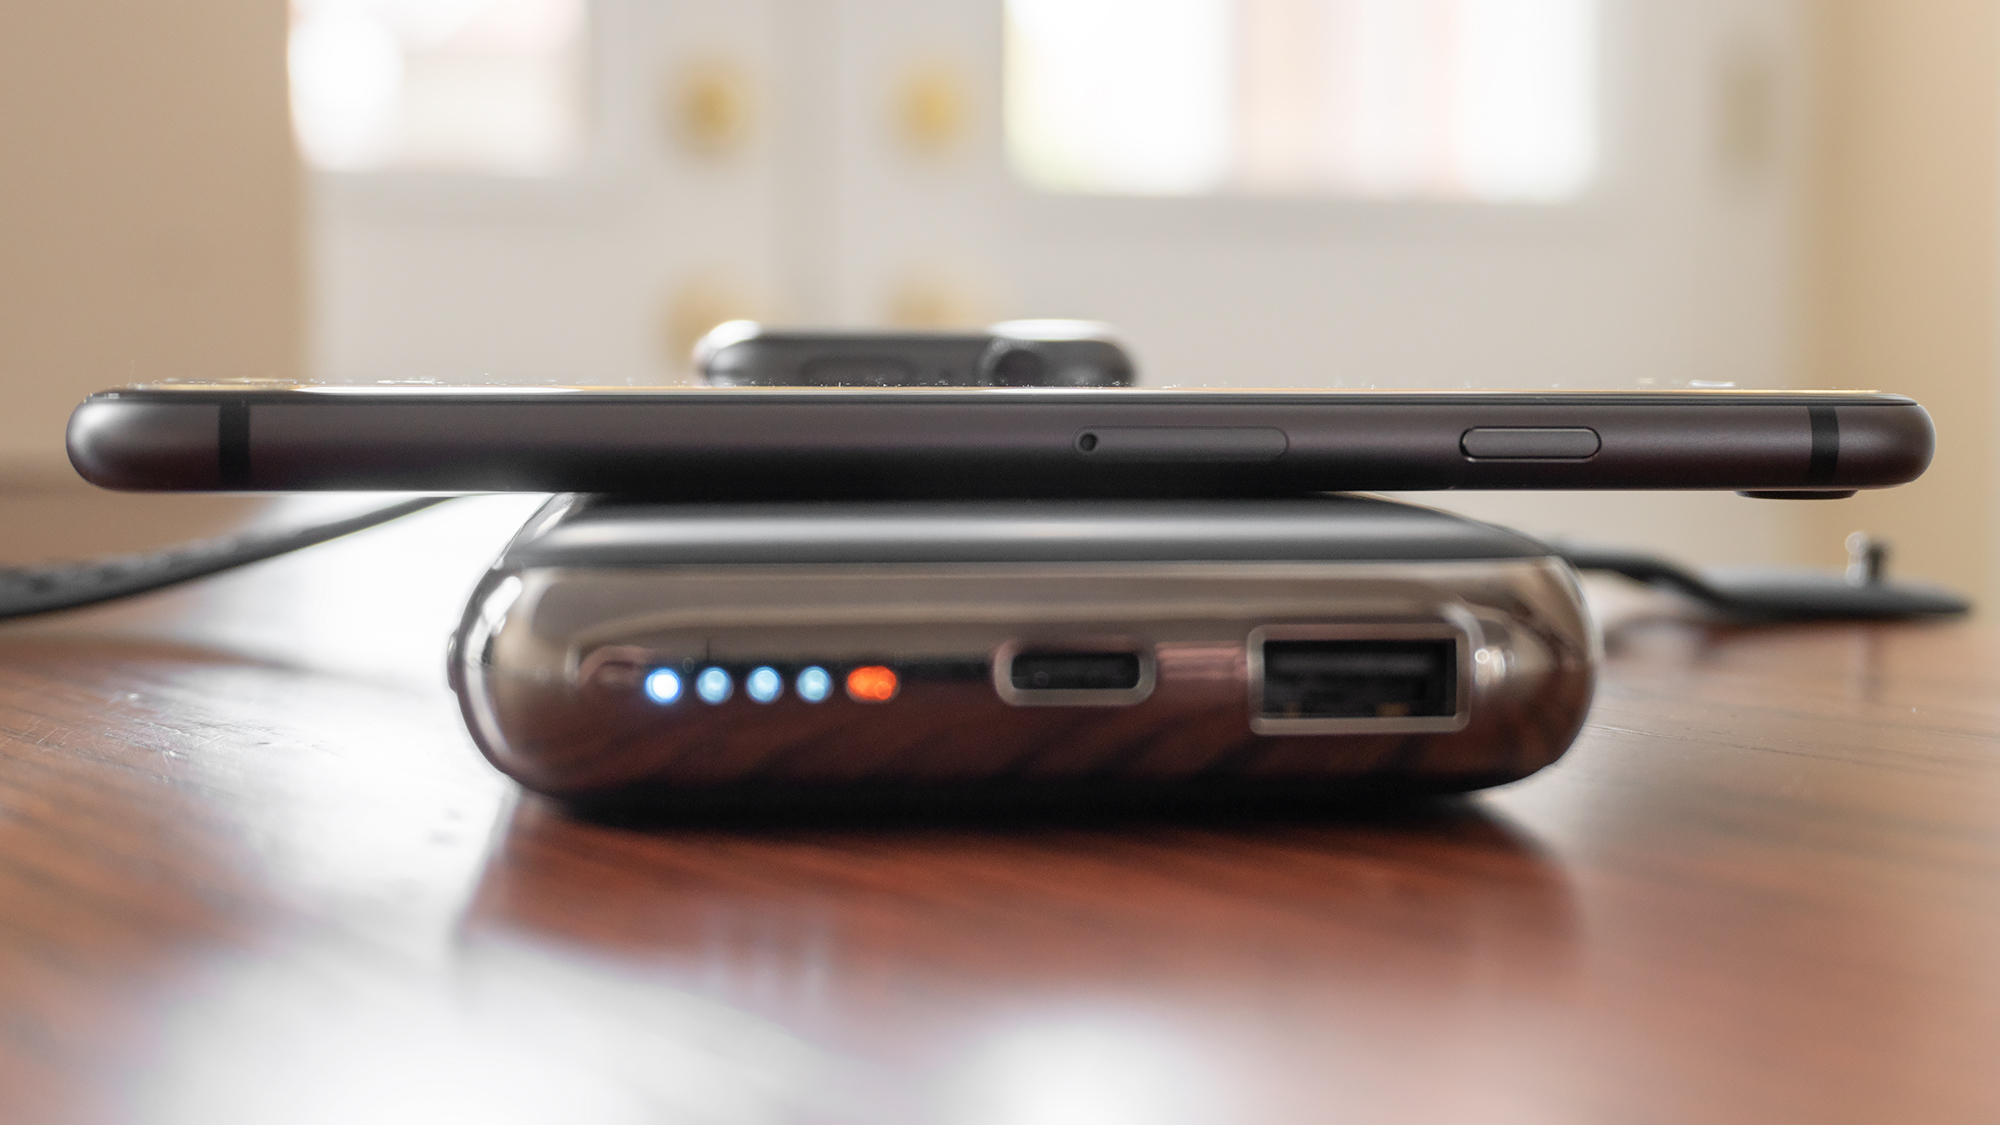 A subtle curve on the Quatro's wireless charging pad means naked smartphones with smooth back panels tend to easily spin when bumped, potentially misaligning the charging coils. (Photo: Andrew Liszewski/Gizmodo)